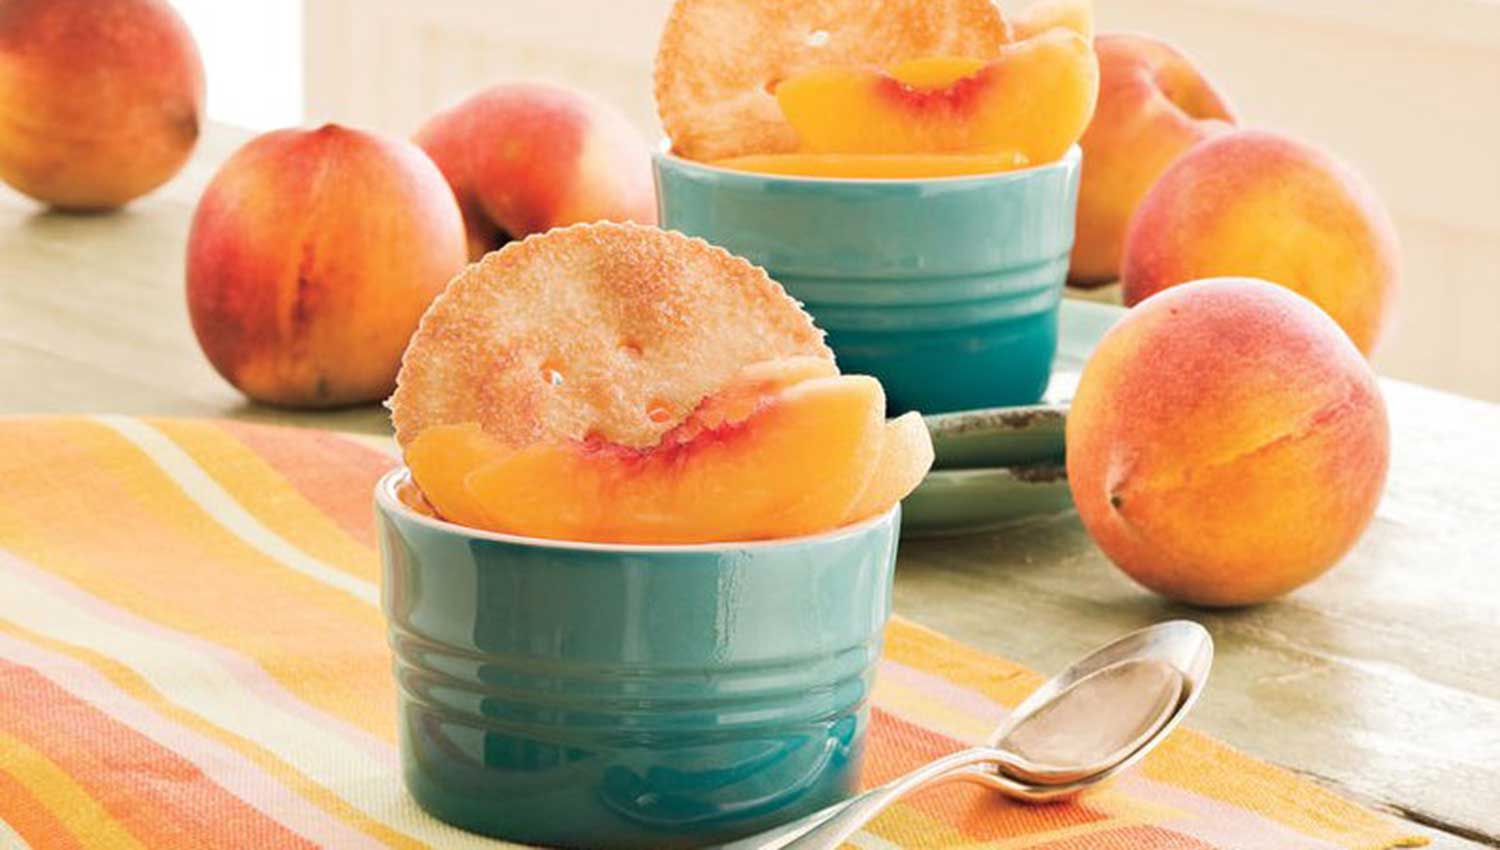 Whole, ripe, red-orange to yellow peaches and blue custard dishes full of a peach dessert